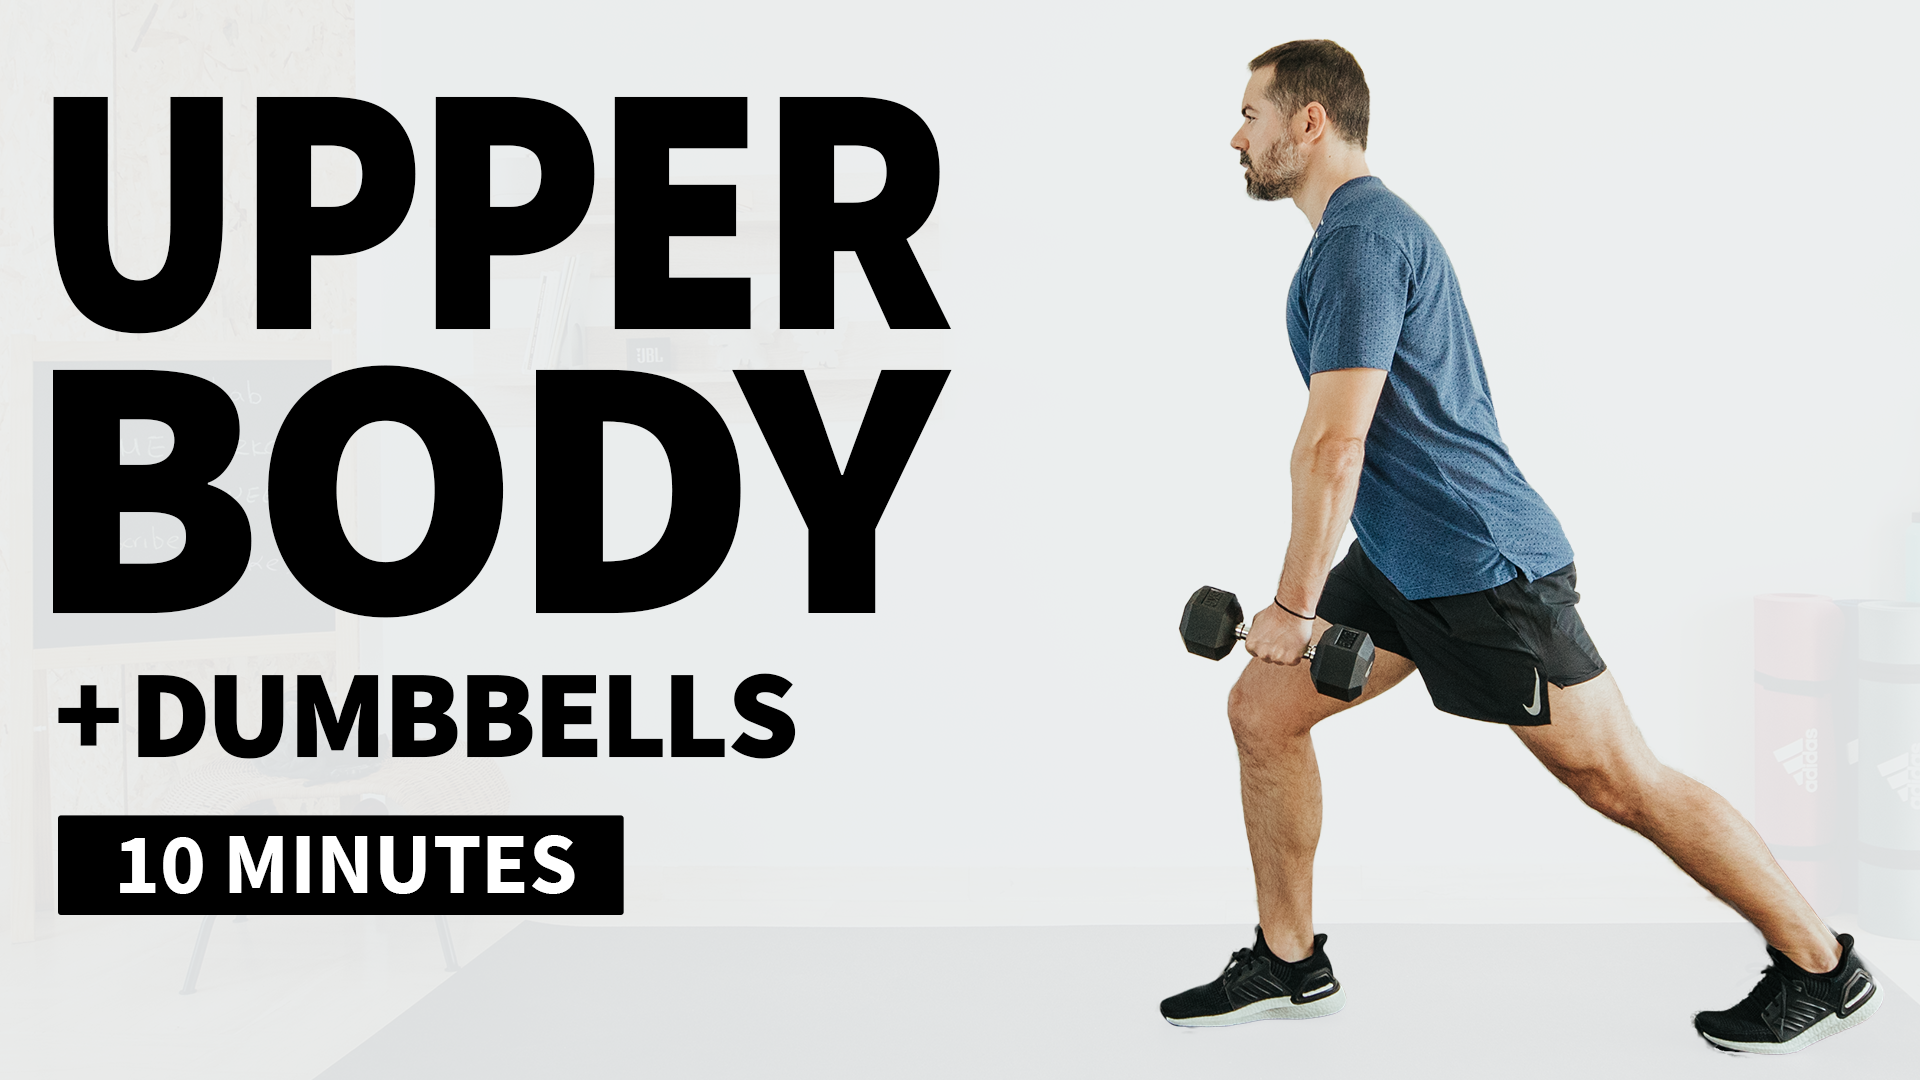 Intense Upper Body Workout From Home | Dumbbells Only